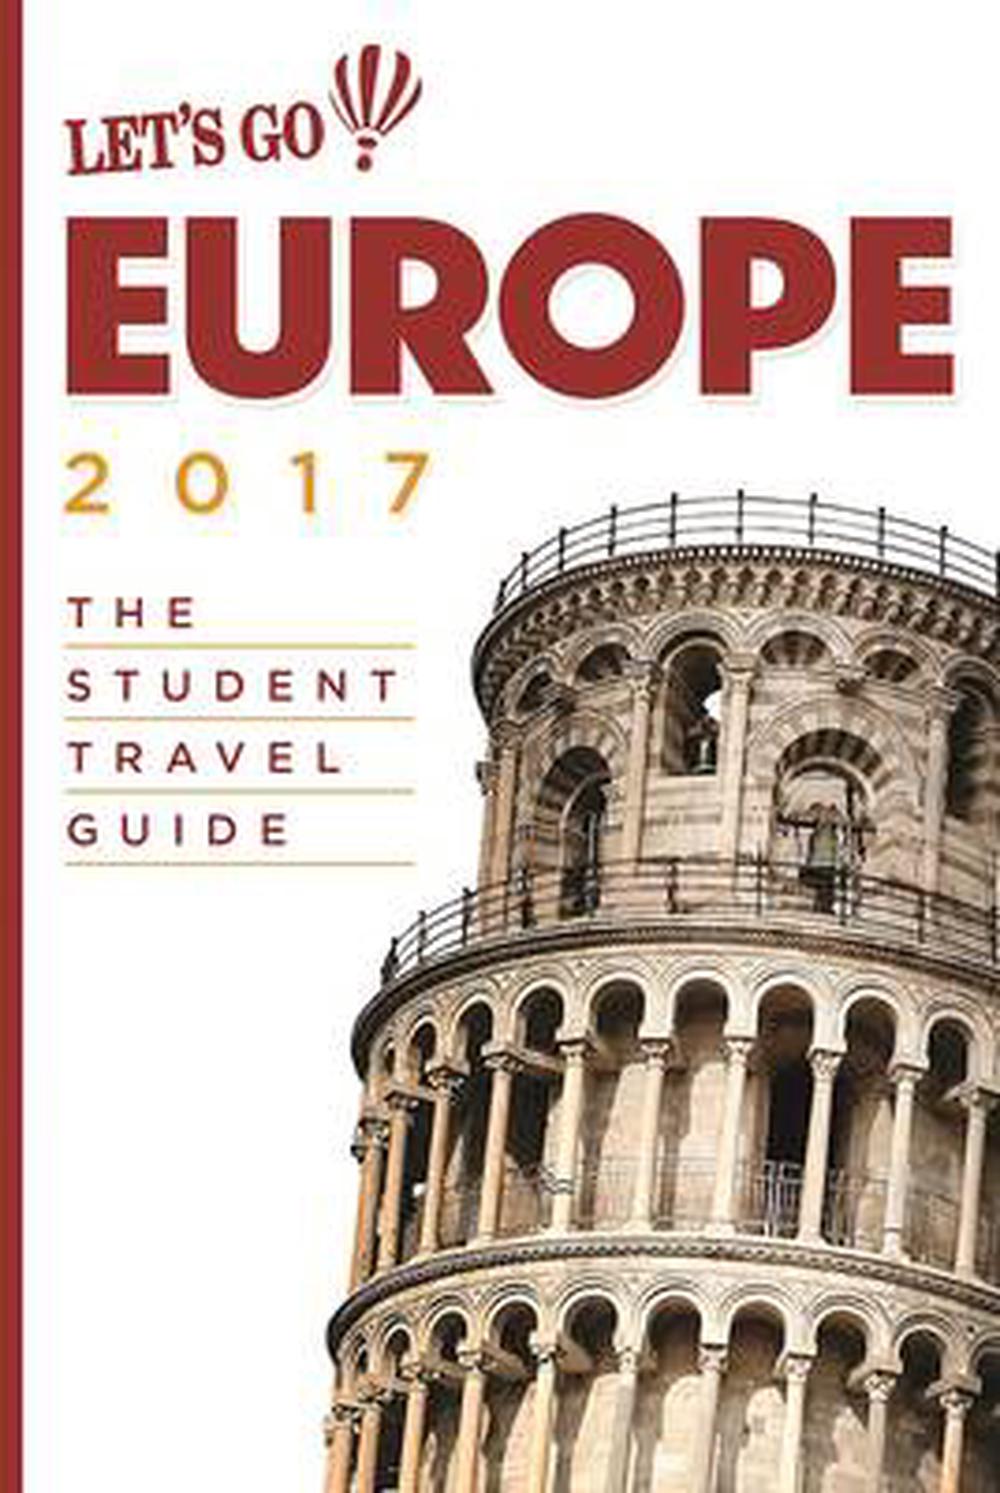 Let's Go Europe 2017 The Student Travel Guide Paperback Book Free